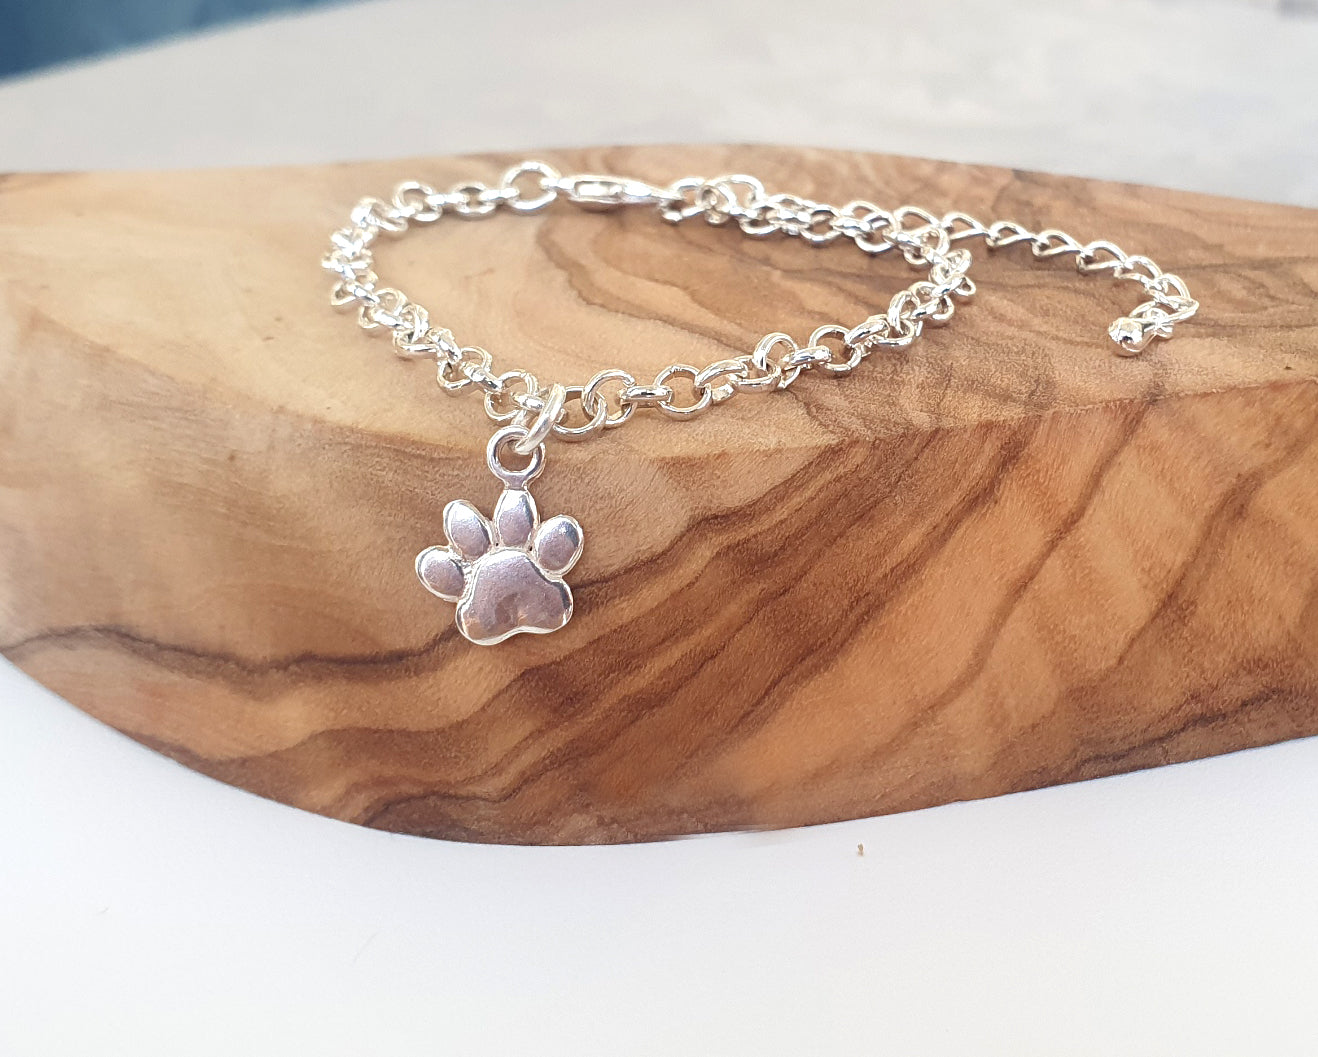 Charmed Puffy Paw Print Link Bracelet, Adjustable for Women and Girl's